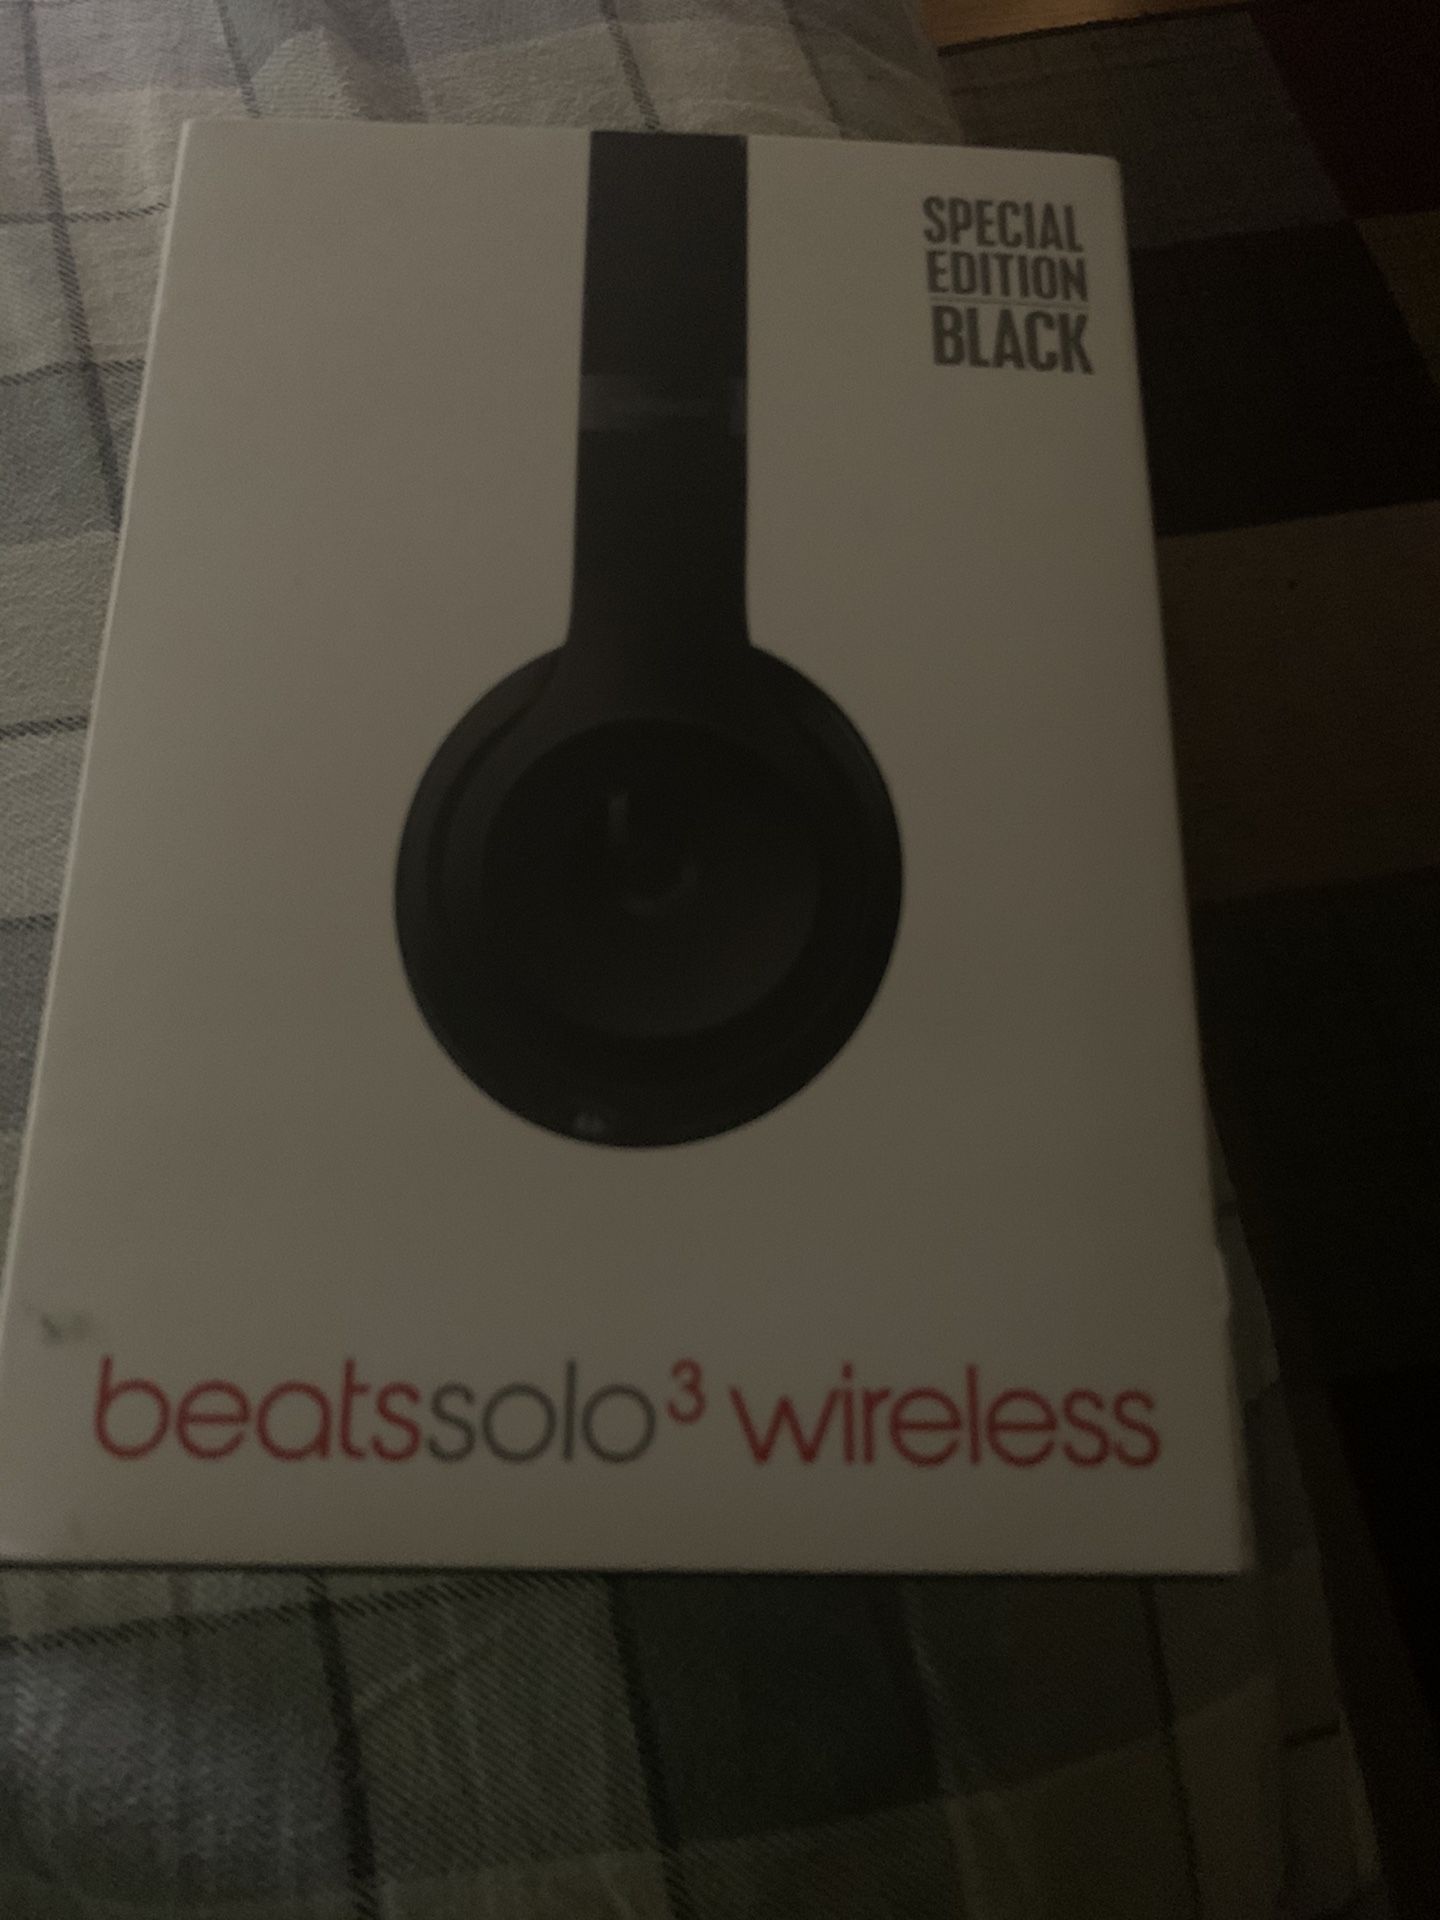 Beats solo 3 wireless, Apple Watch 4 series 44m, 2 12 inch speakers, 700 watt amp with a crossover and a PlayStation 4 pro Spider-Man edition with 5